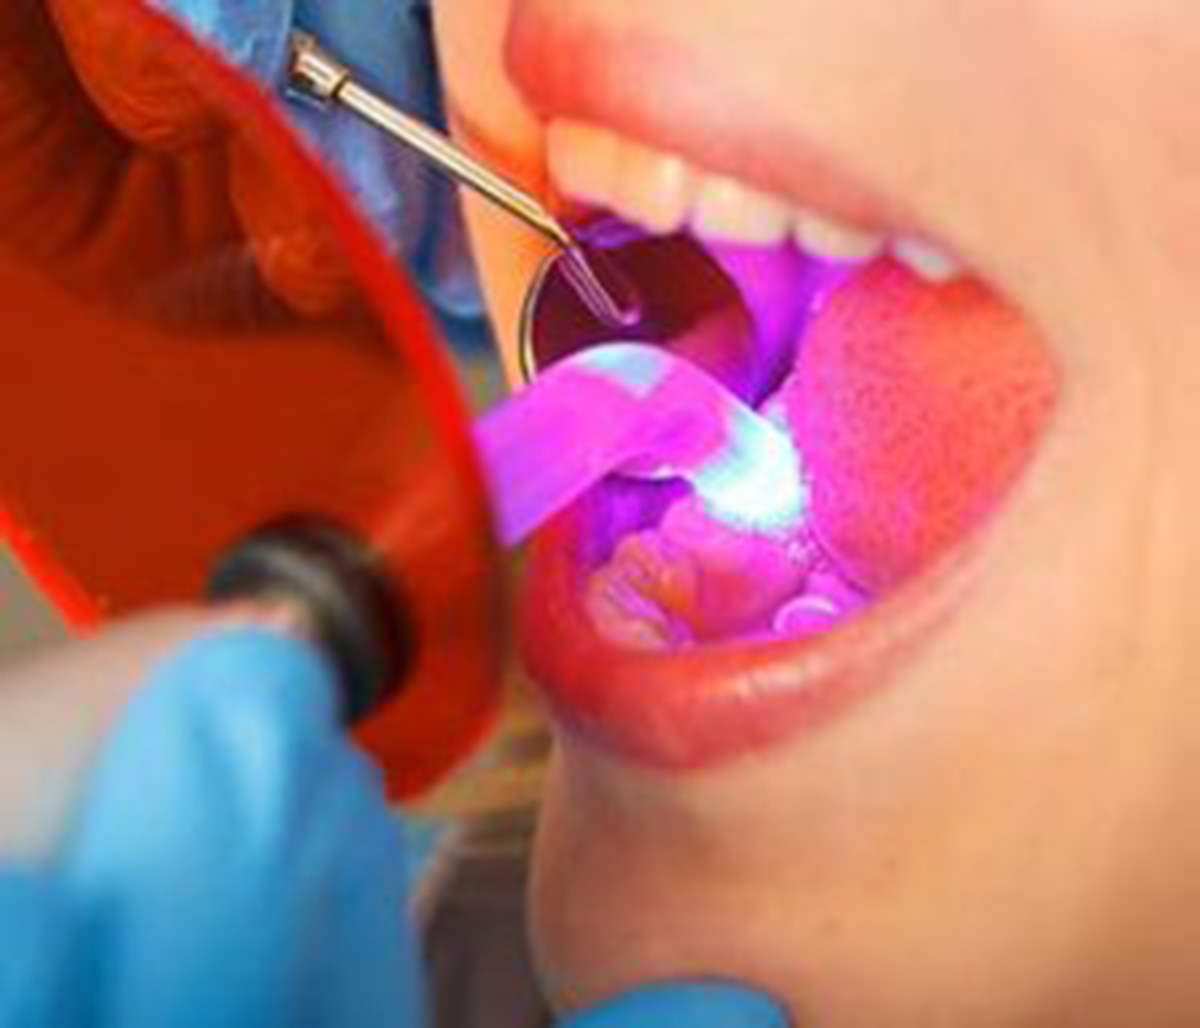 Dentist doing a Ozone treatment for a patient